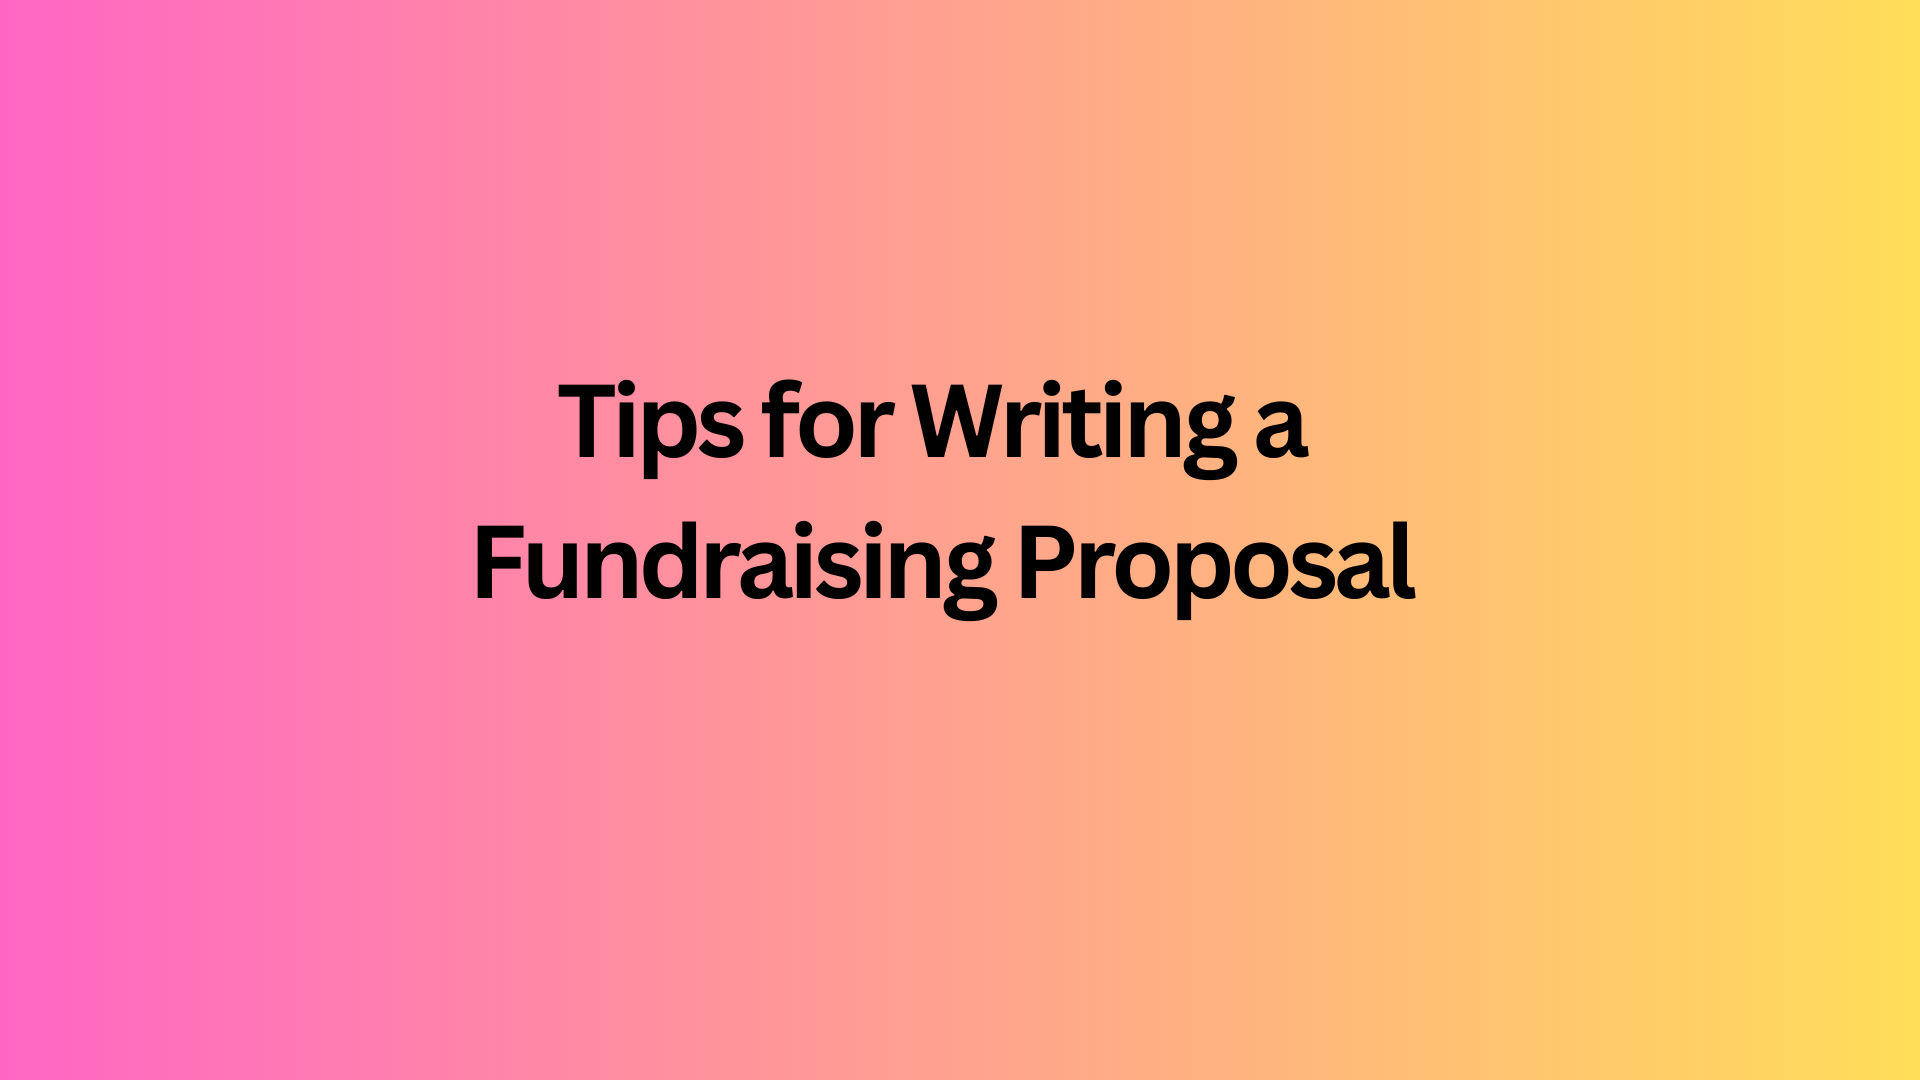 Tips for Writing a Fundraising Proposal